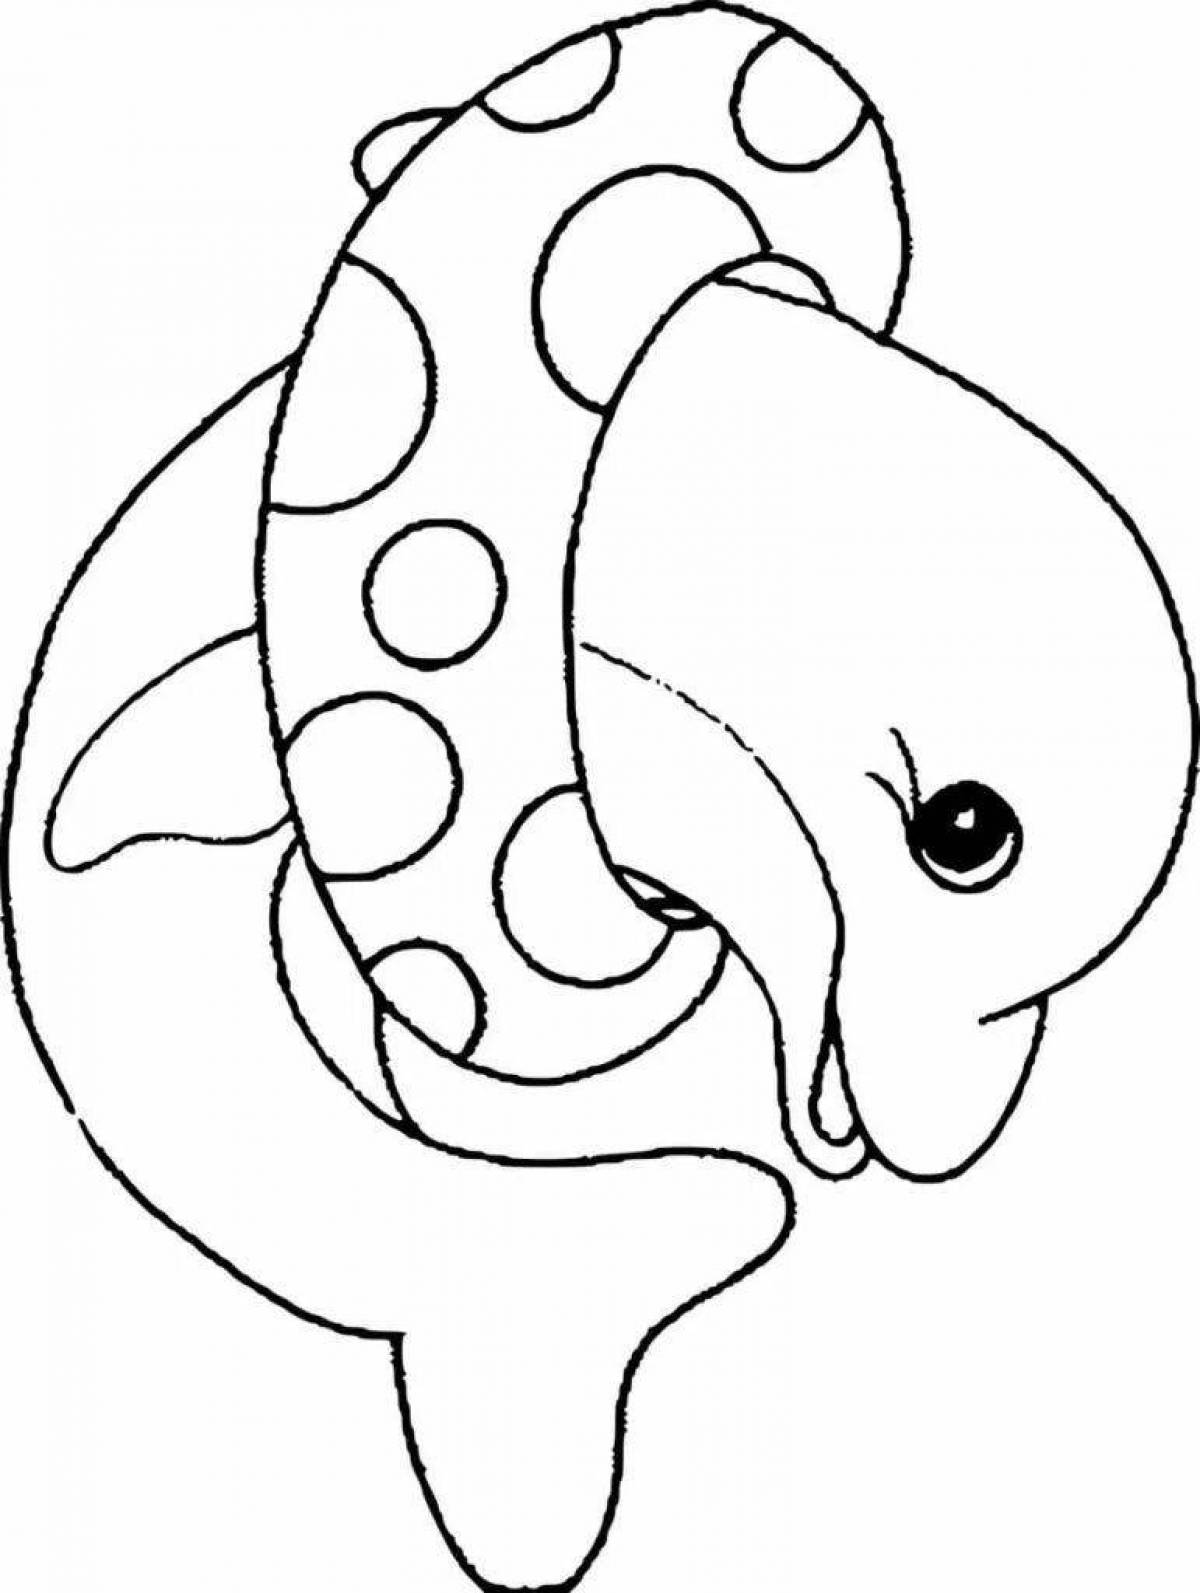 Live dolphin coloring book for kids